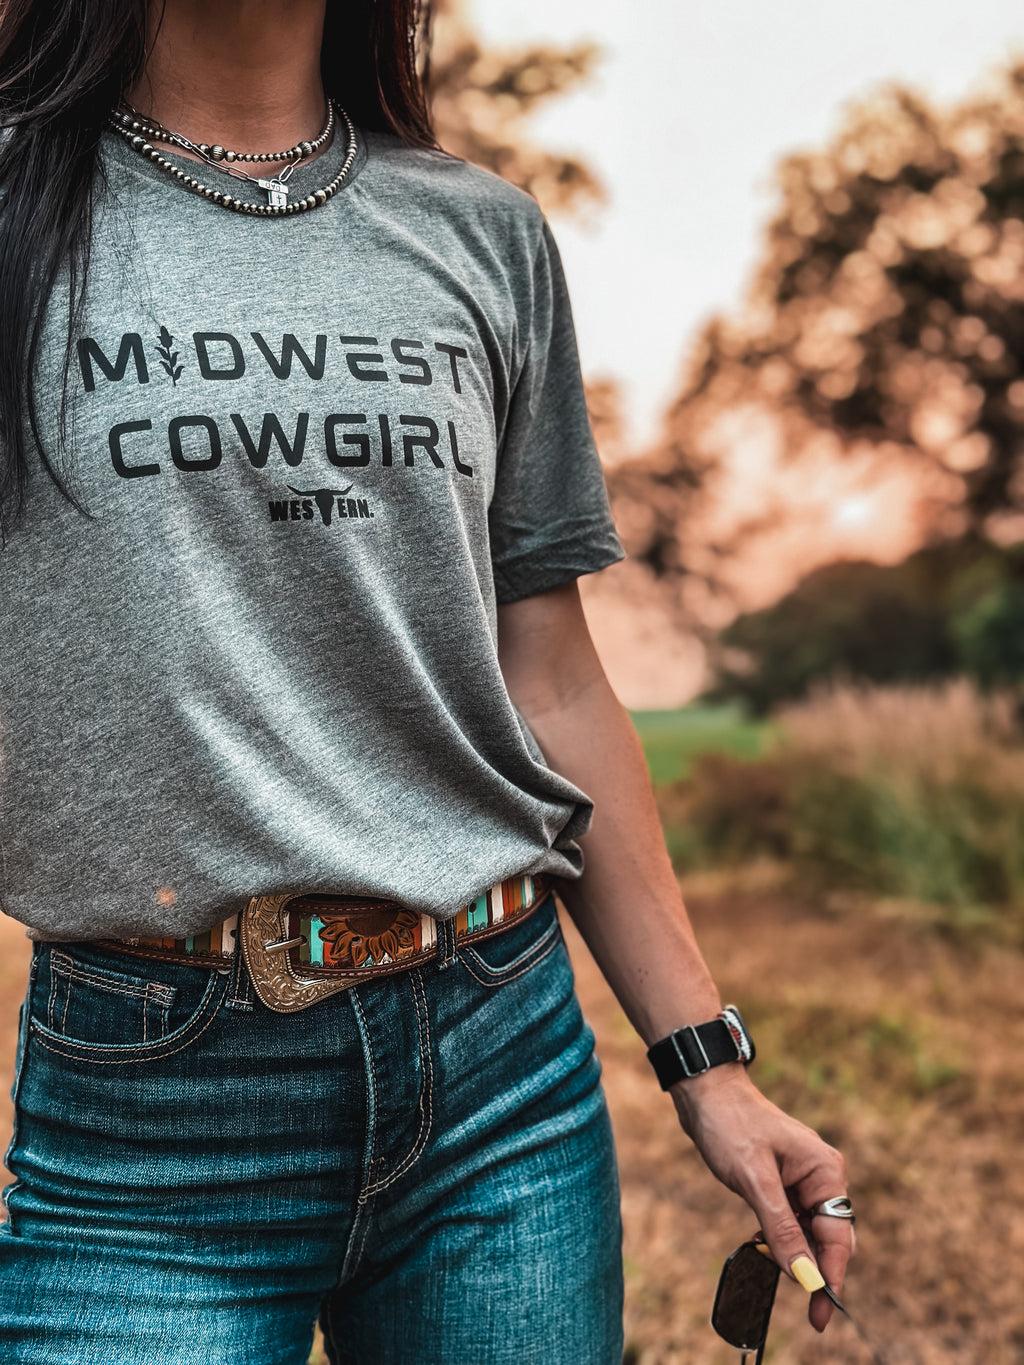 Midwest Cowgirl - Grey